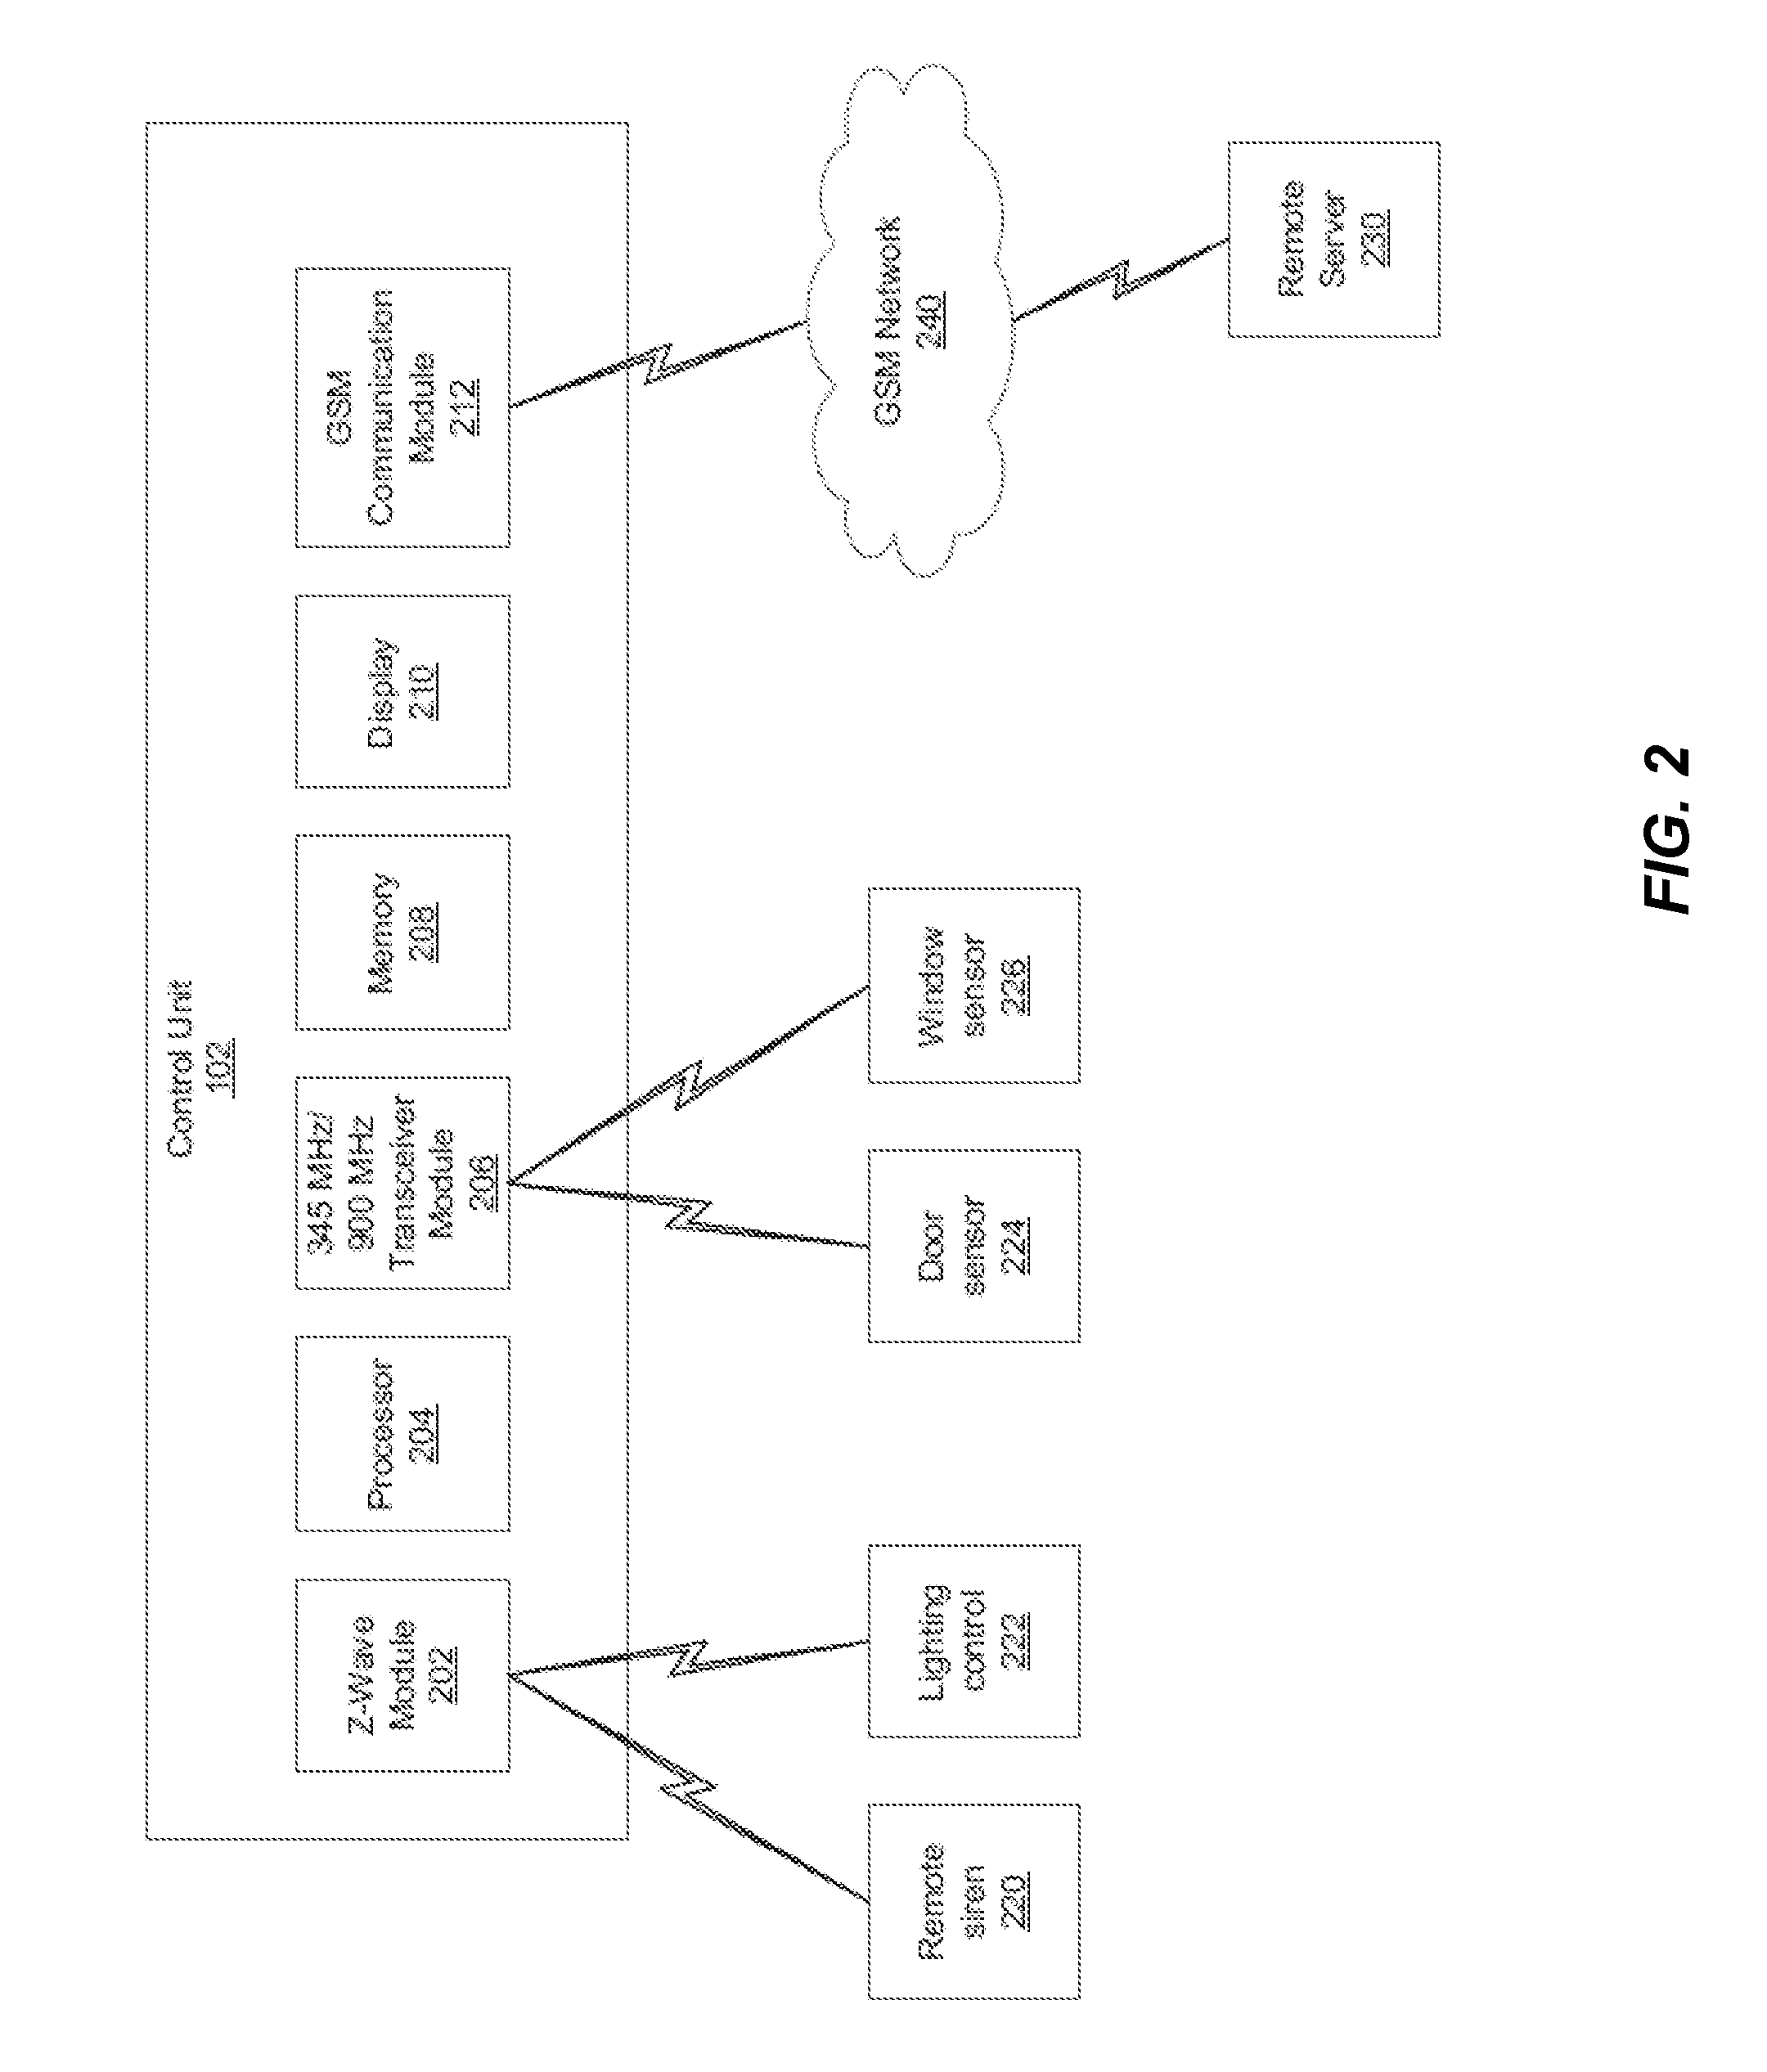 Expandable in-wall antenna for a security system control unit